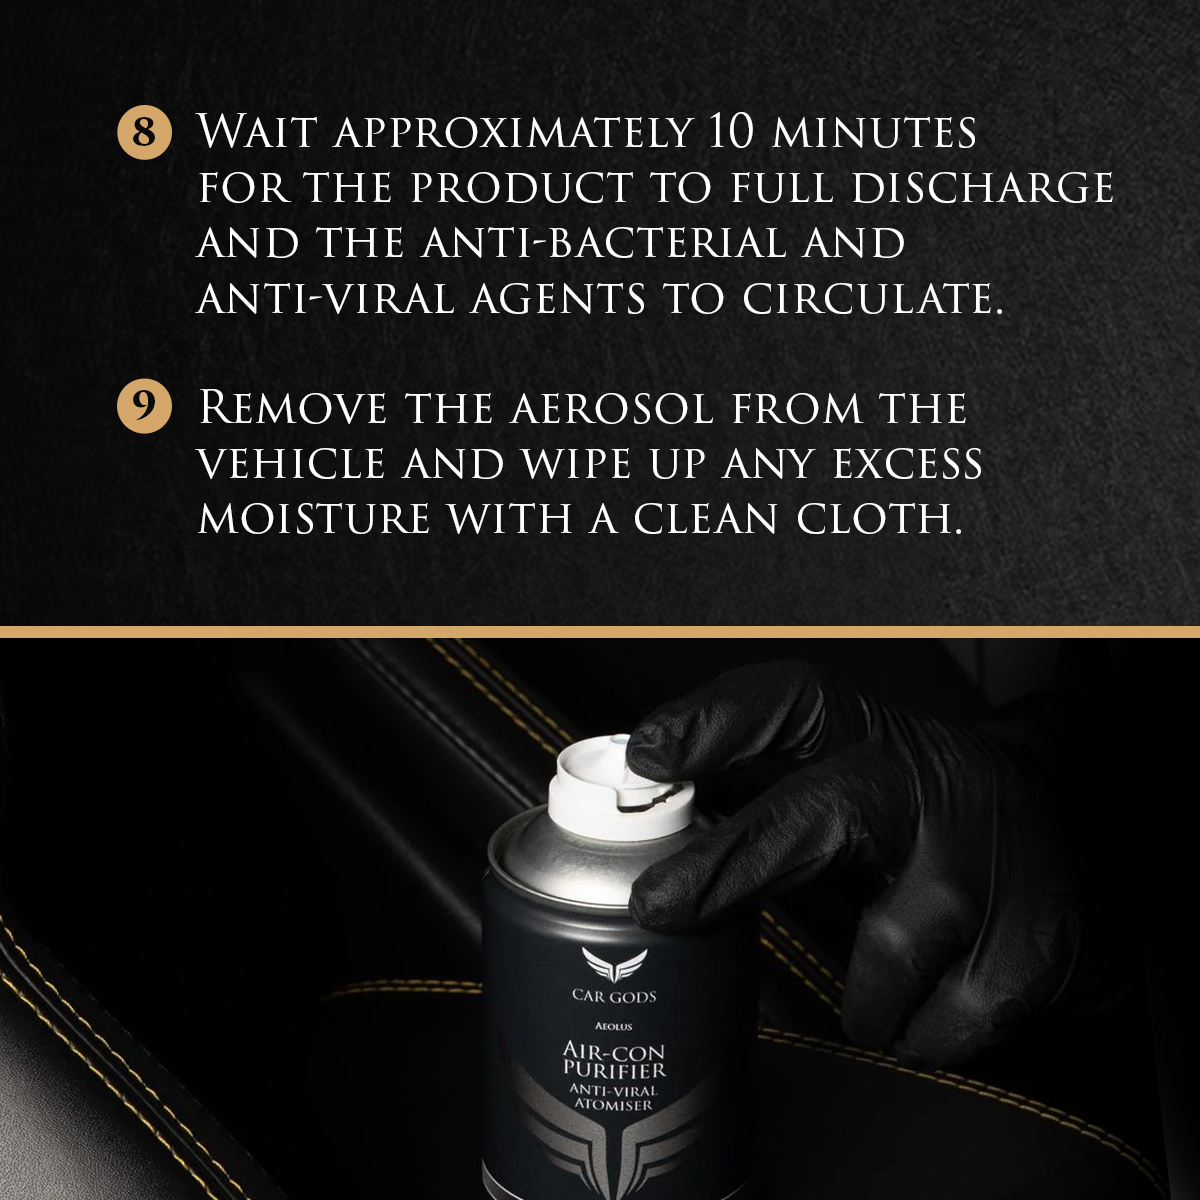 Image shows aerosol can spraying purifying formula into the vehicle after finger tab has been pressed. Text: This product will not stain upholstery. Do not smoke near vehicle while Air-Con Purifier is discharging and whilst ventilating the vehicle. The vehicle must be well ventilated after use of this product by opening all doors for 10 minutes. Do not leave vehicle unattended when aerosol is in use. Do not use in freezing conditions. Only use as directed.